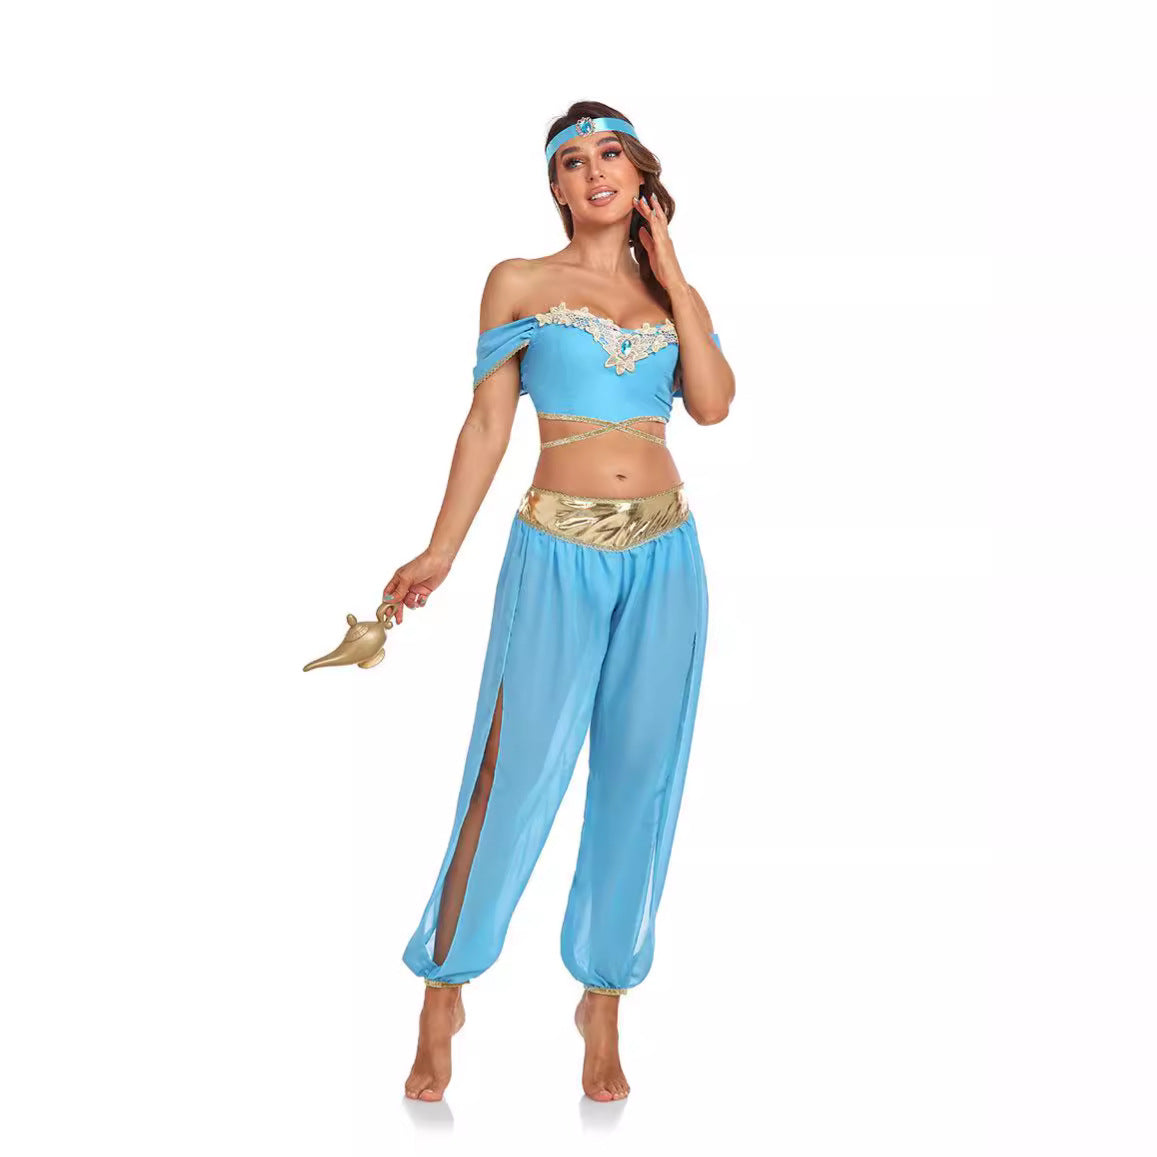 Liberty Arab Goddess Outfit Split Belly Dance Costumes